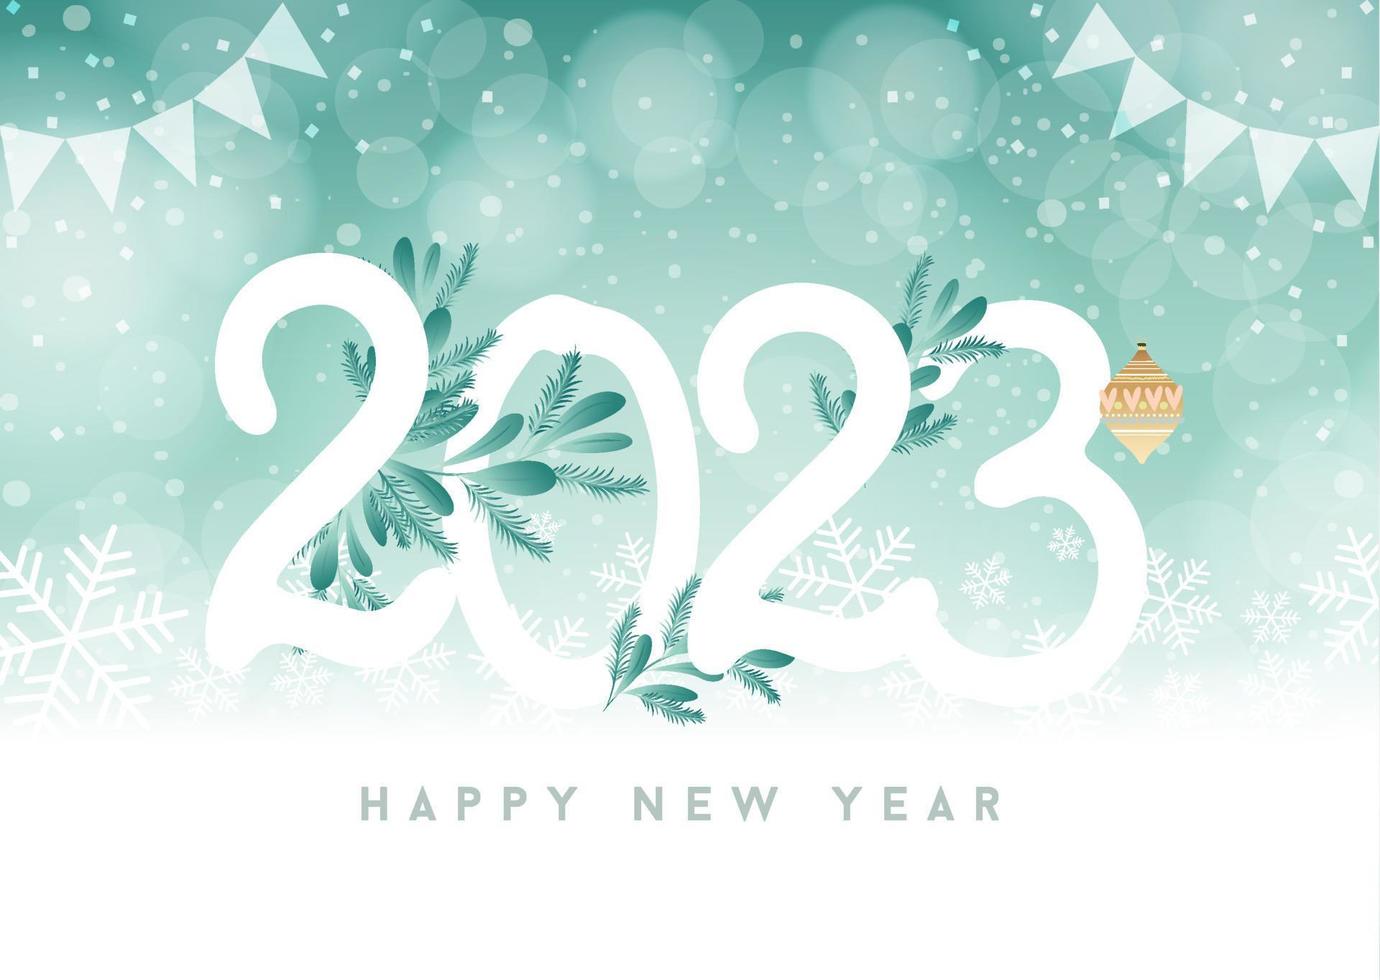 2023 A Happy New Year signs in winter with heavy snowfall. Numbers of year 2023. Christmas snow, snowflakes, and flower leaf. Christmas and New Year holiday background. Vector illustration.